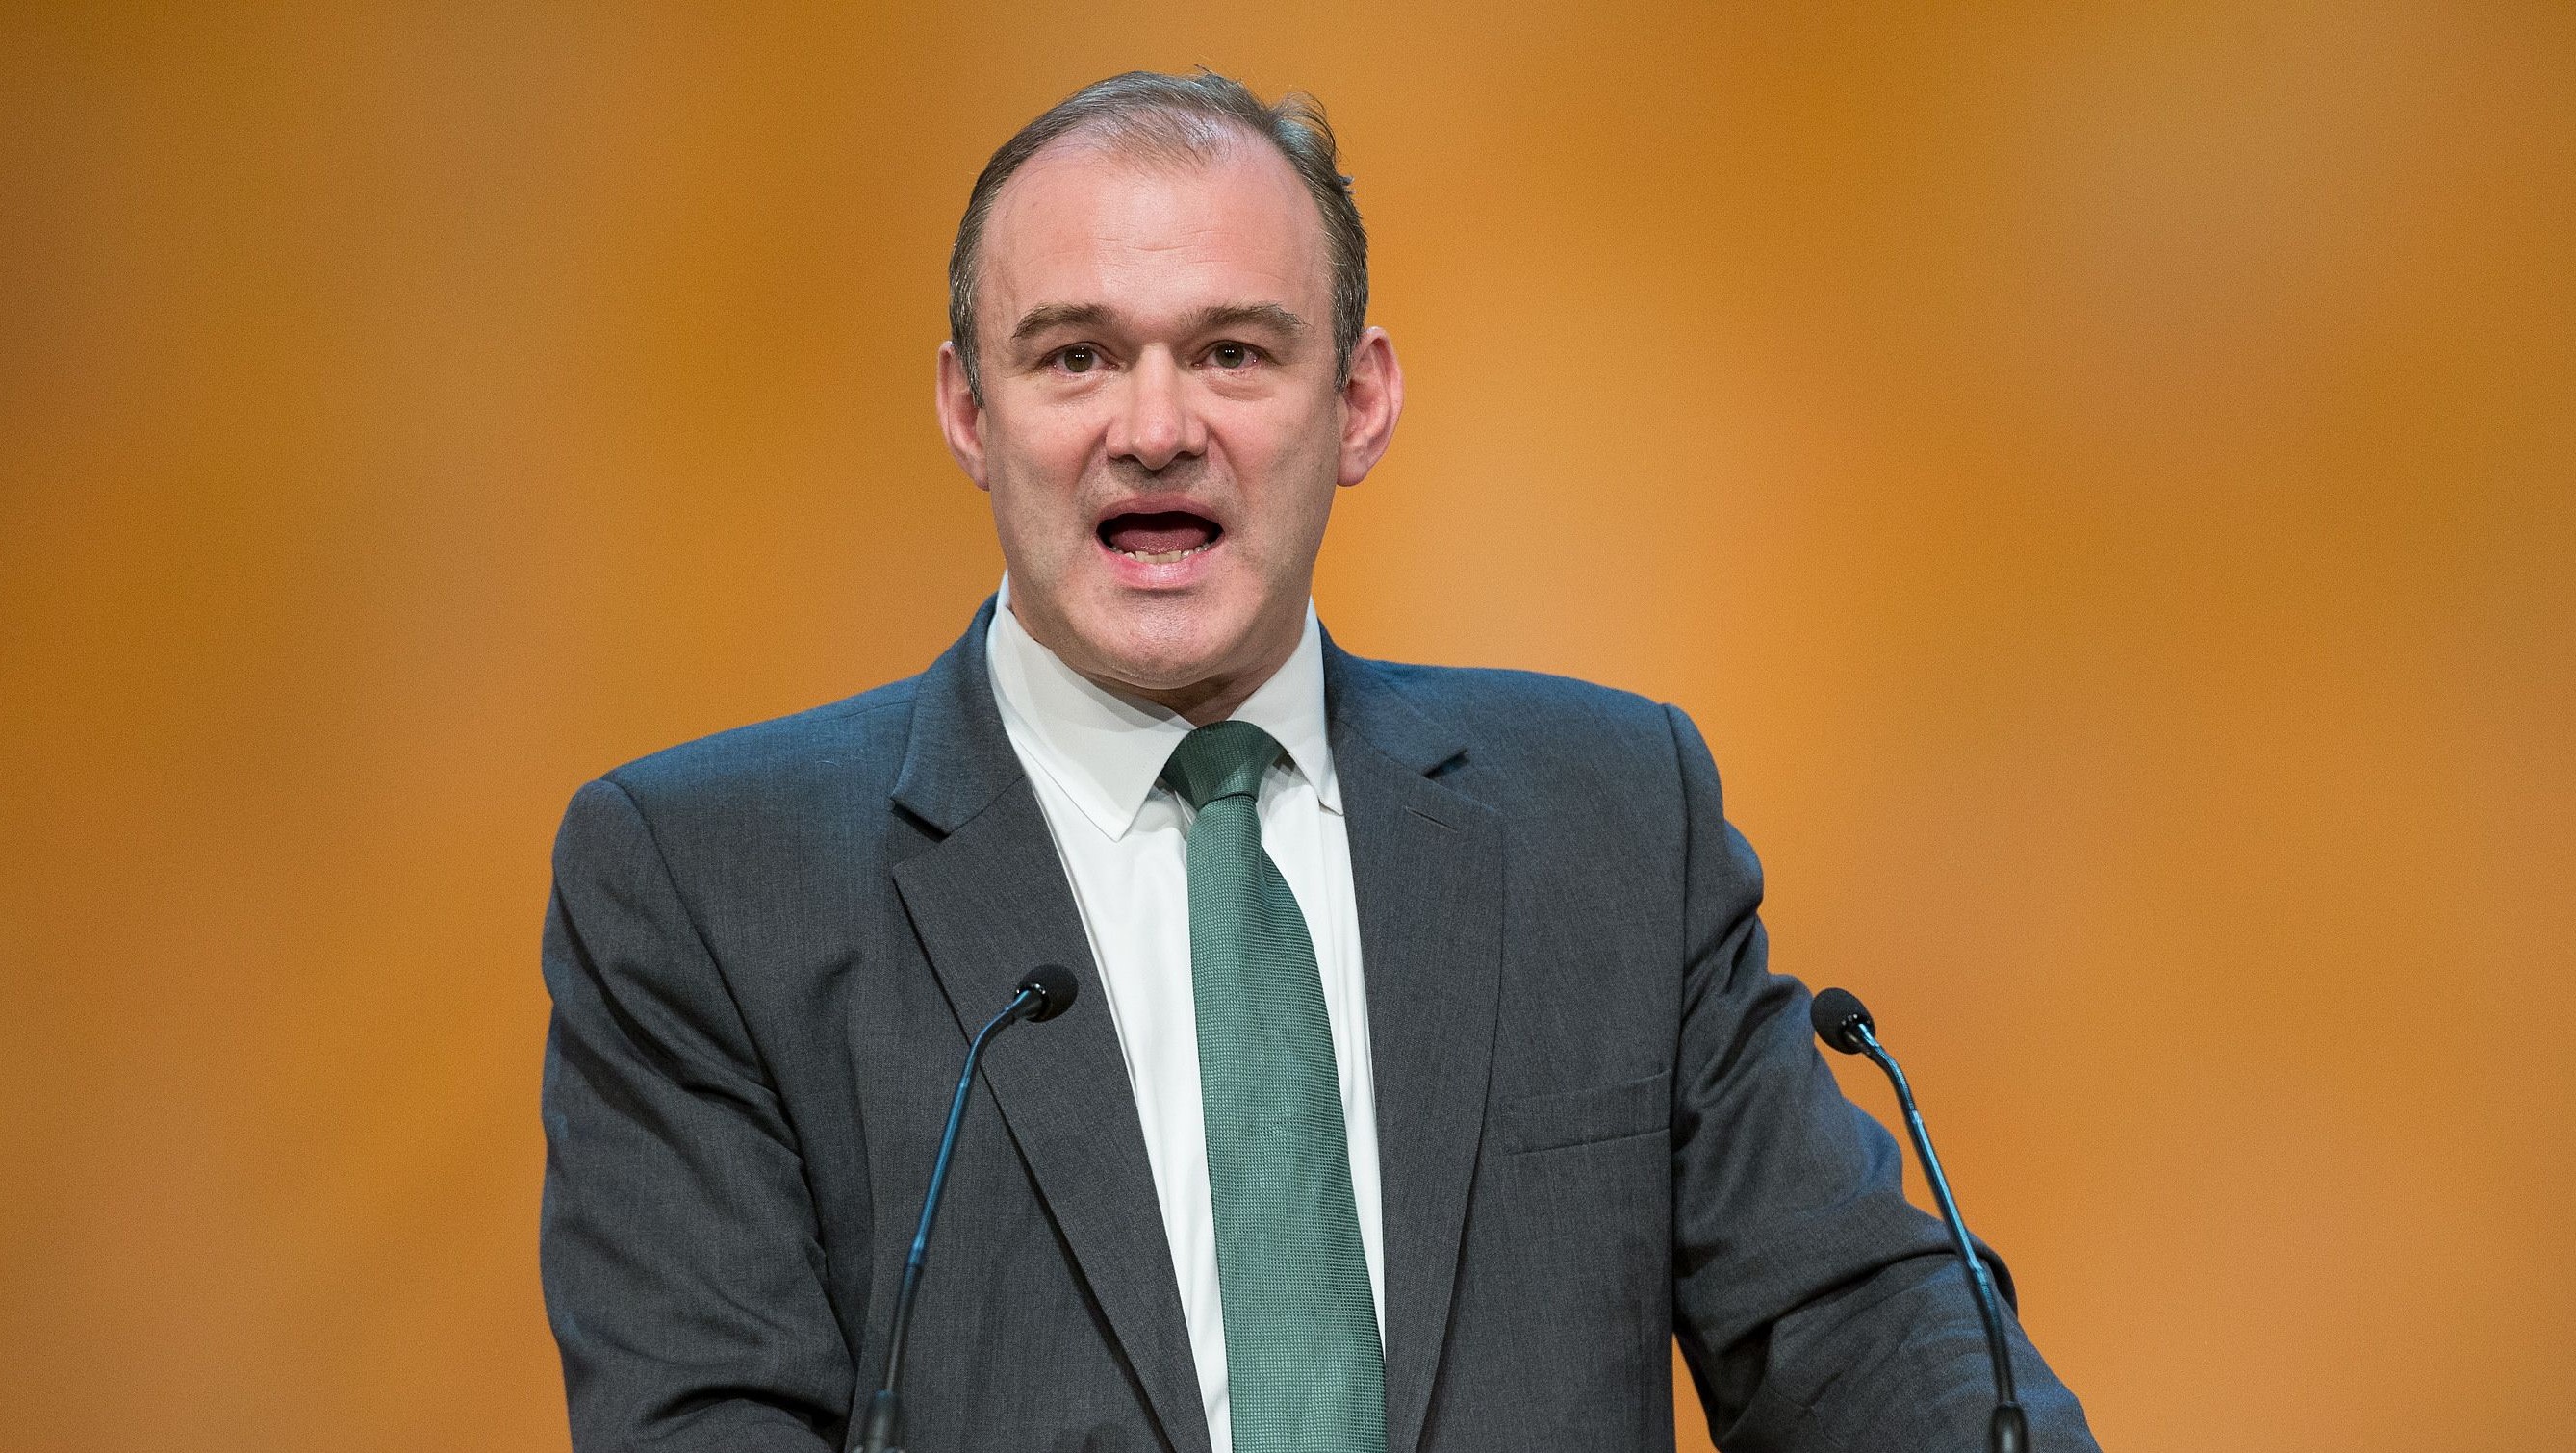 Ed Davey criticised for listing unpaid vacancy